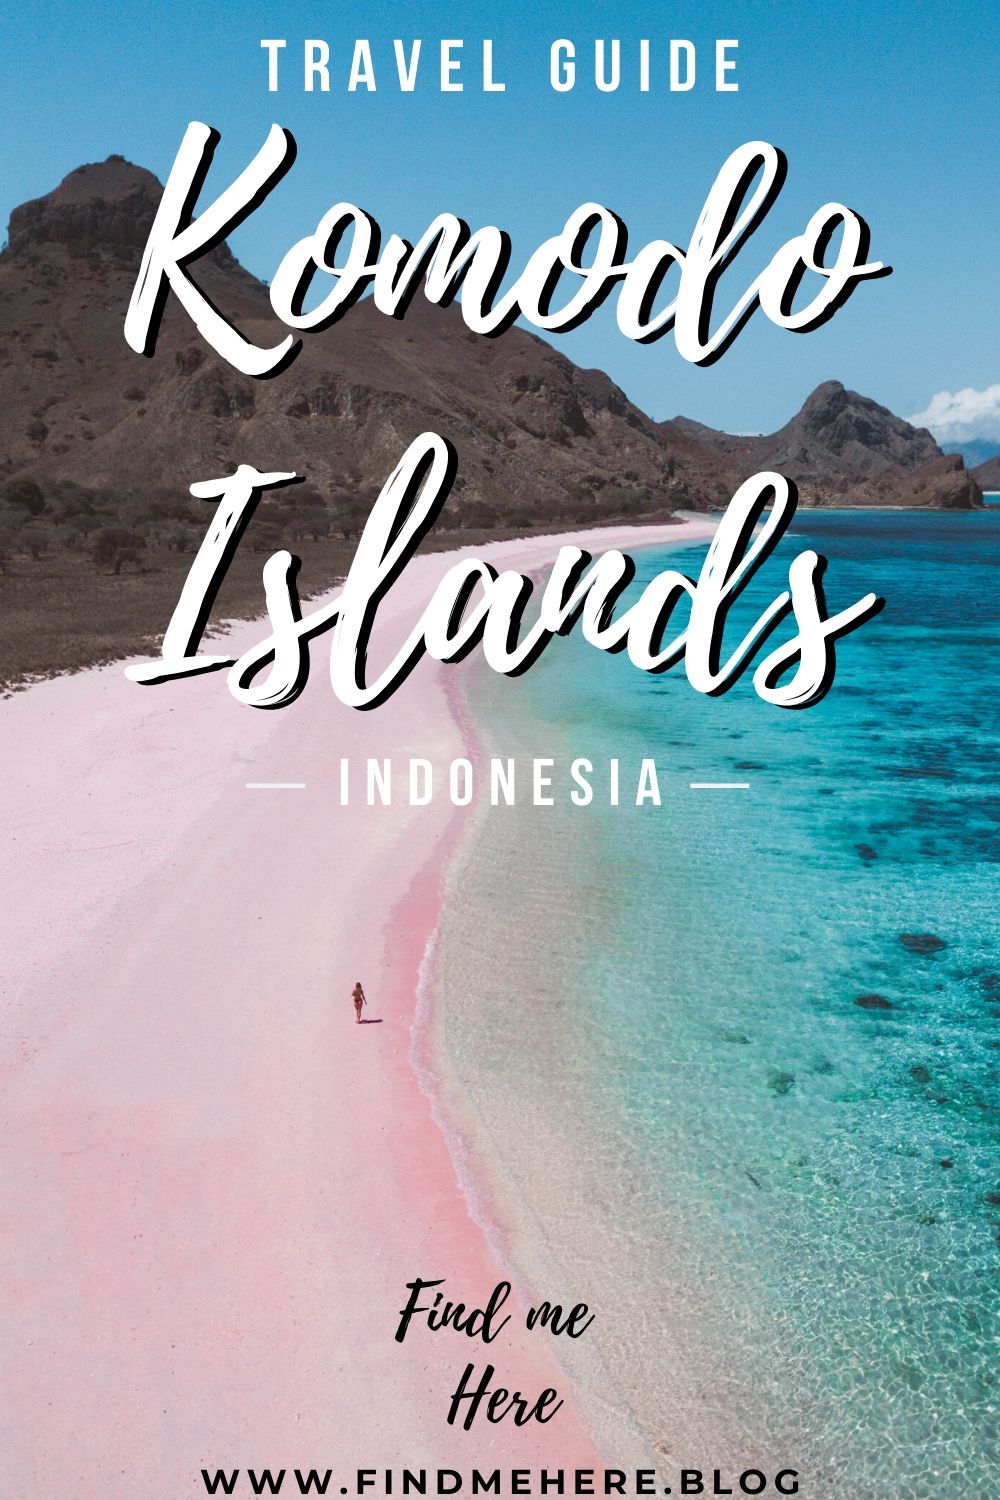 The Komodo Islands are still an untouched paradise - read this full travel guide to know what to do and when to visit the Komodo Islands, including how to visit pink beach, Labuan Bajo and how to swim with manta rays. Scuba diving in Komodo Islands #komodoislands #indonesia #komodo #bali #liveaboard #travelguide #itinerary